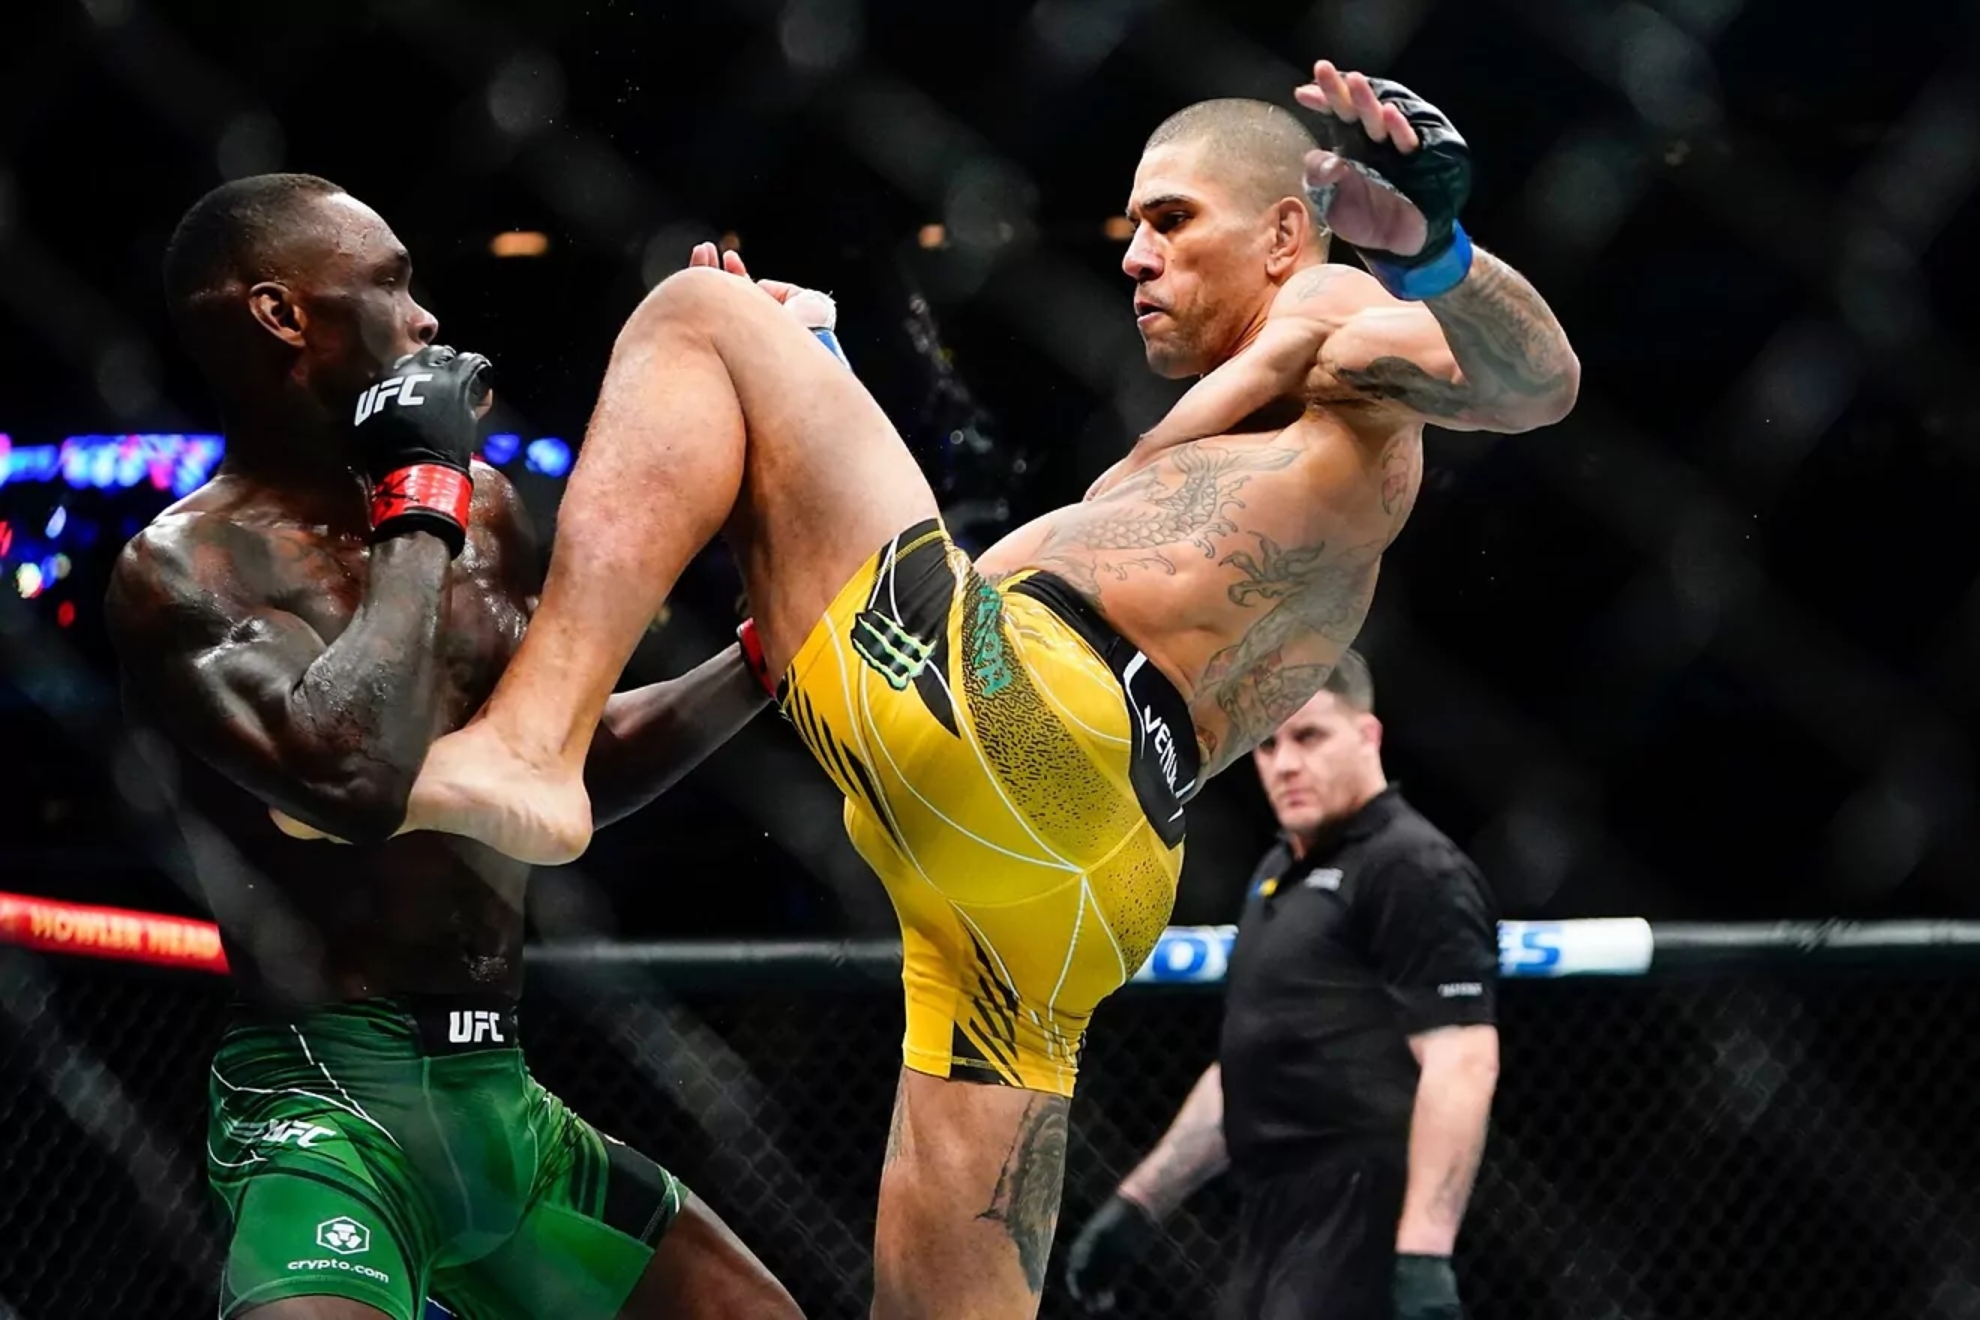 Alex Pereira takes on Israel Adesanya for the first time in the UFC.